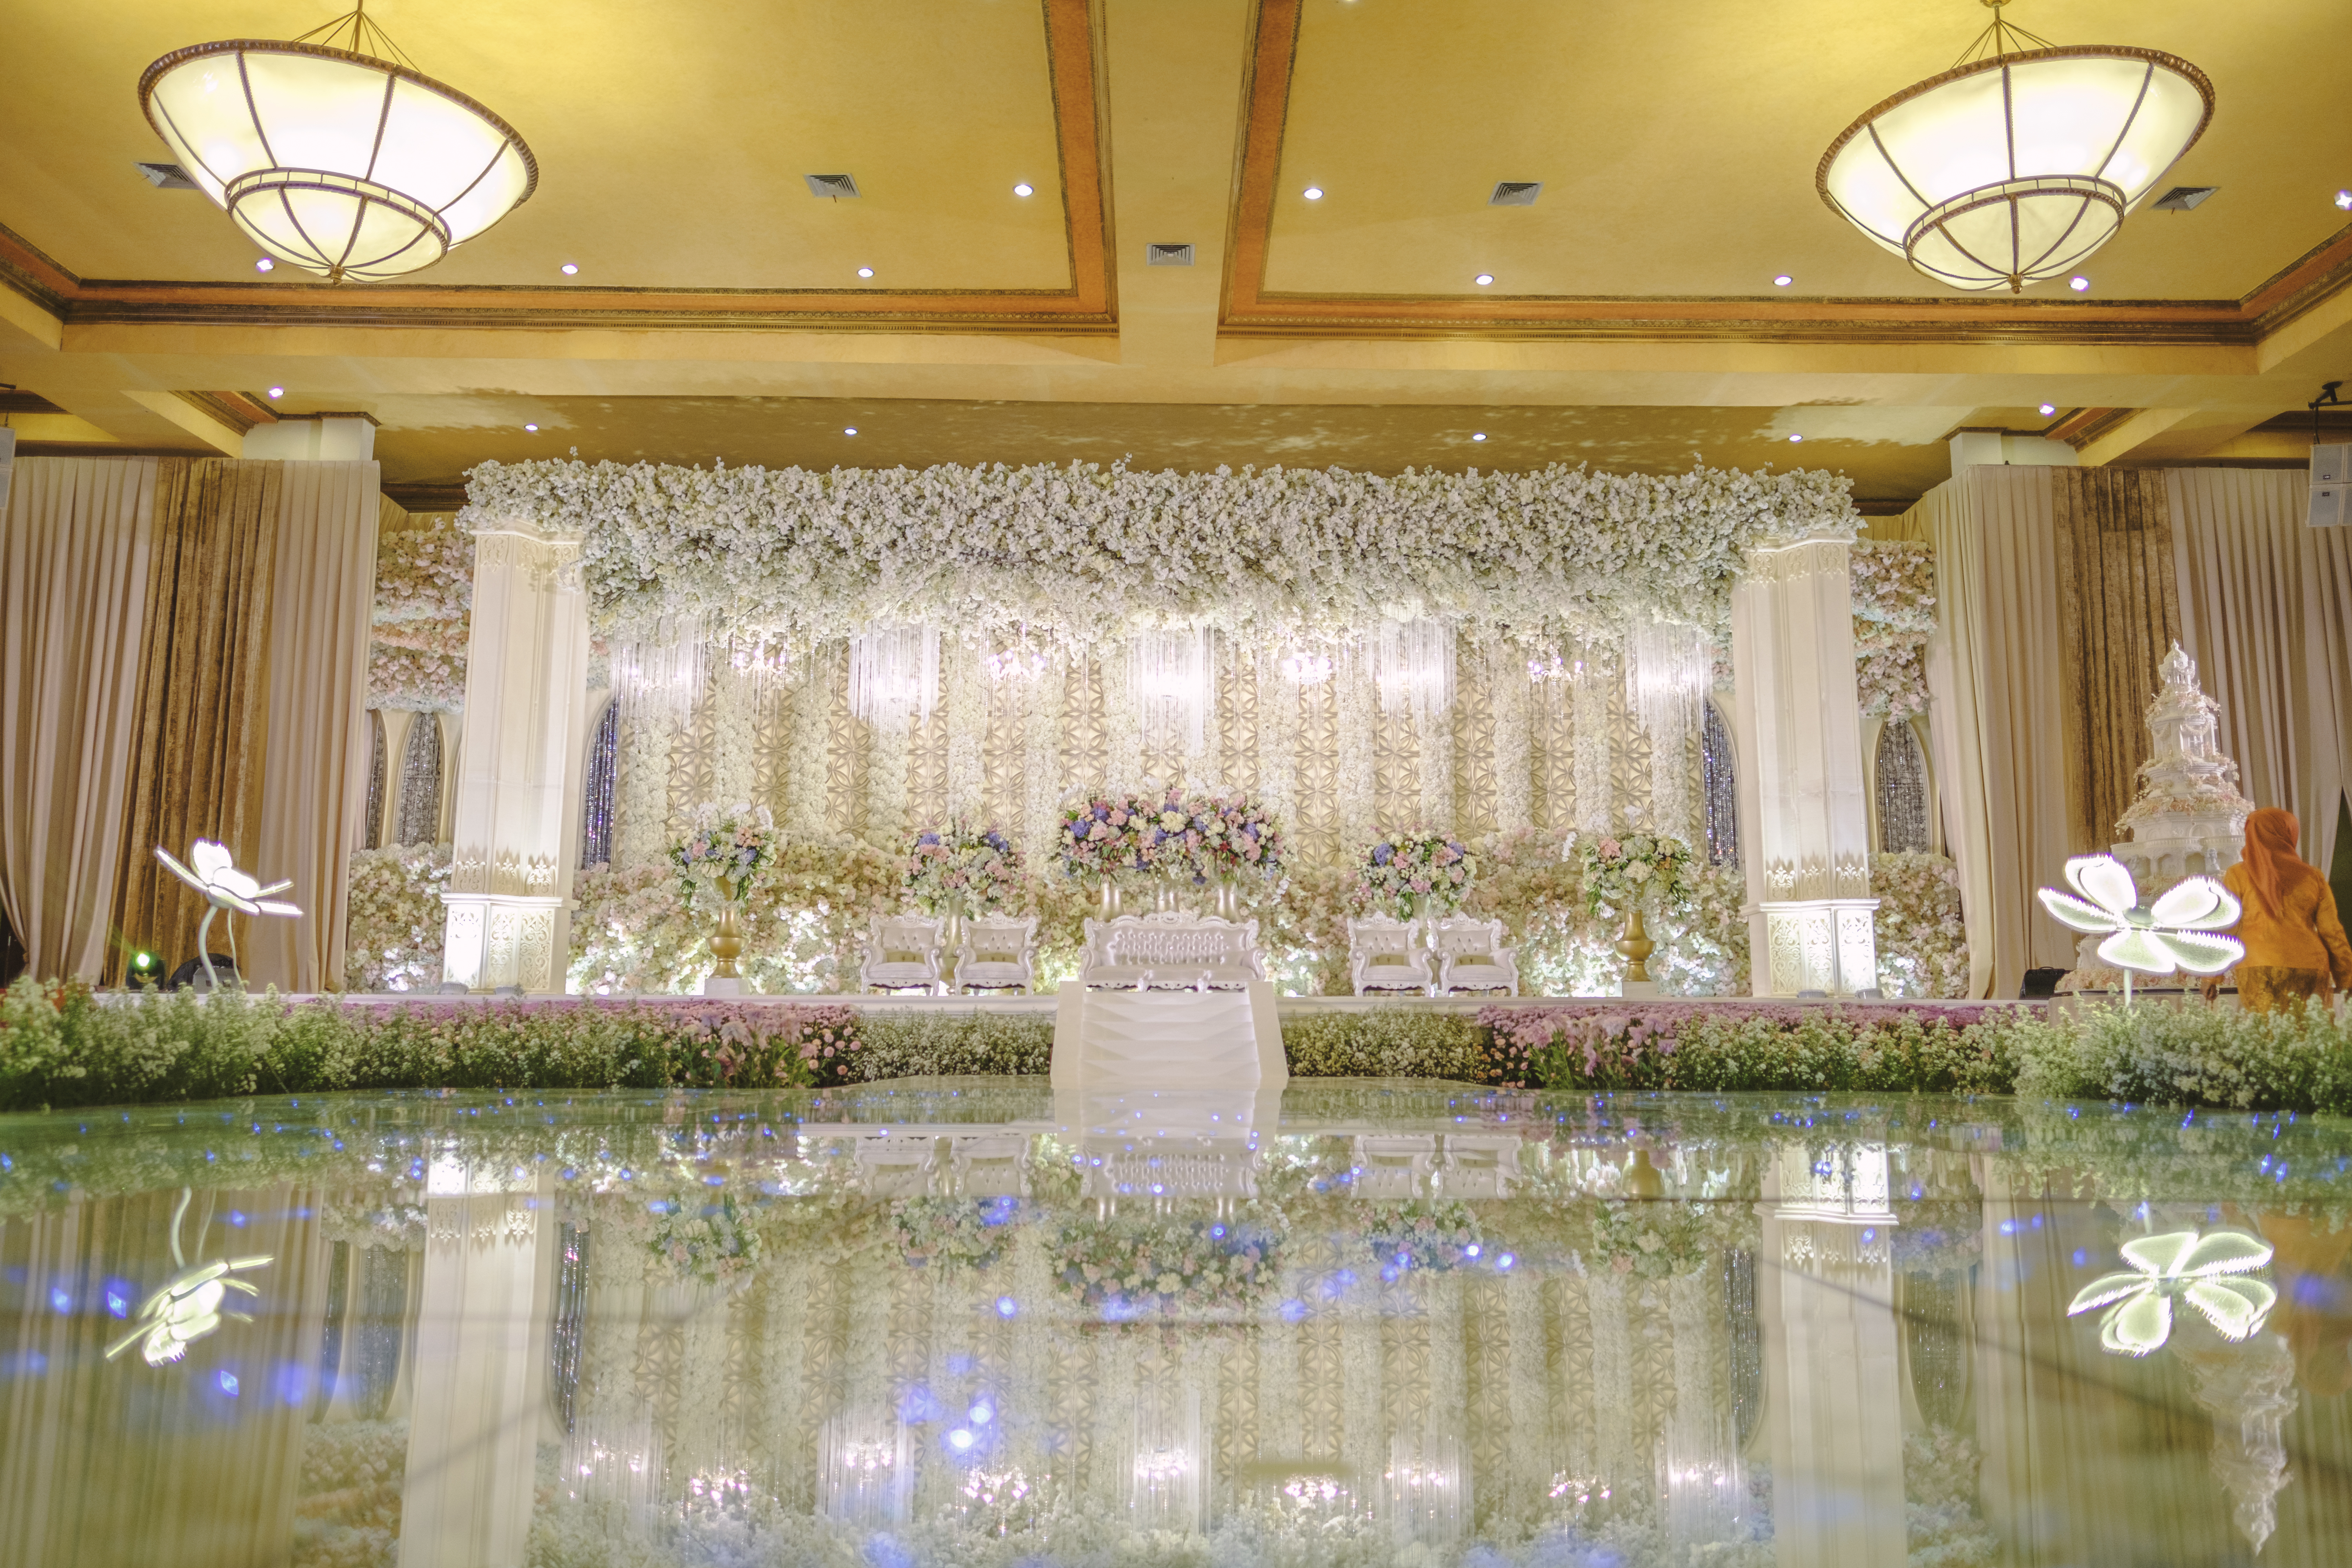 Regina and Erwin's Wedding Reception | Venue at Balai Samudera | Decoration by White Pearl Decoration | Lighting by Lightworks